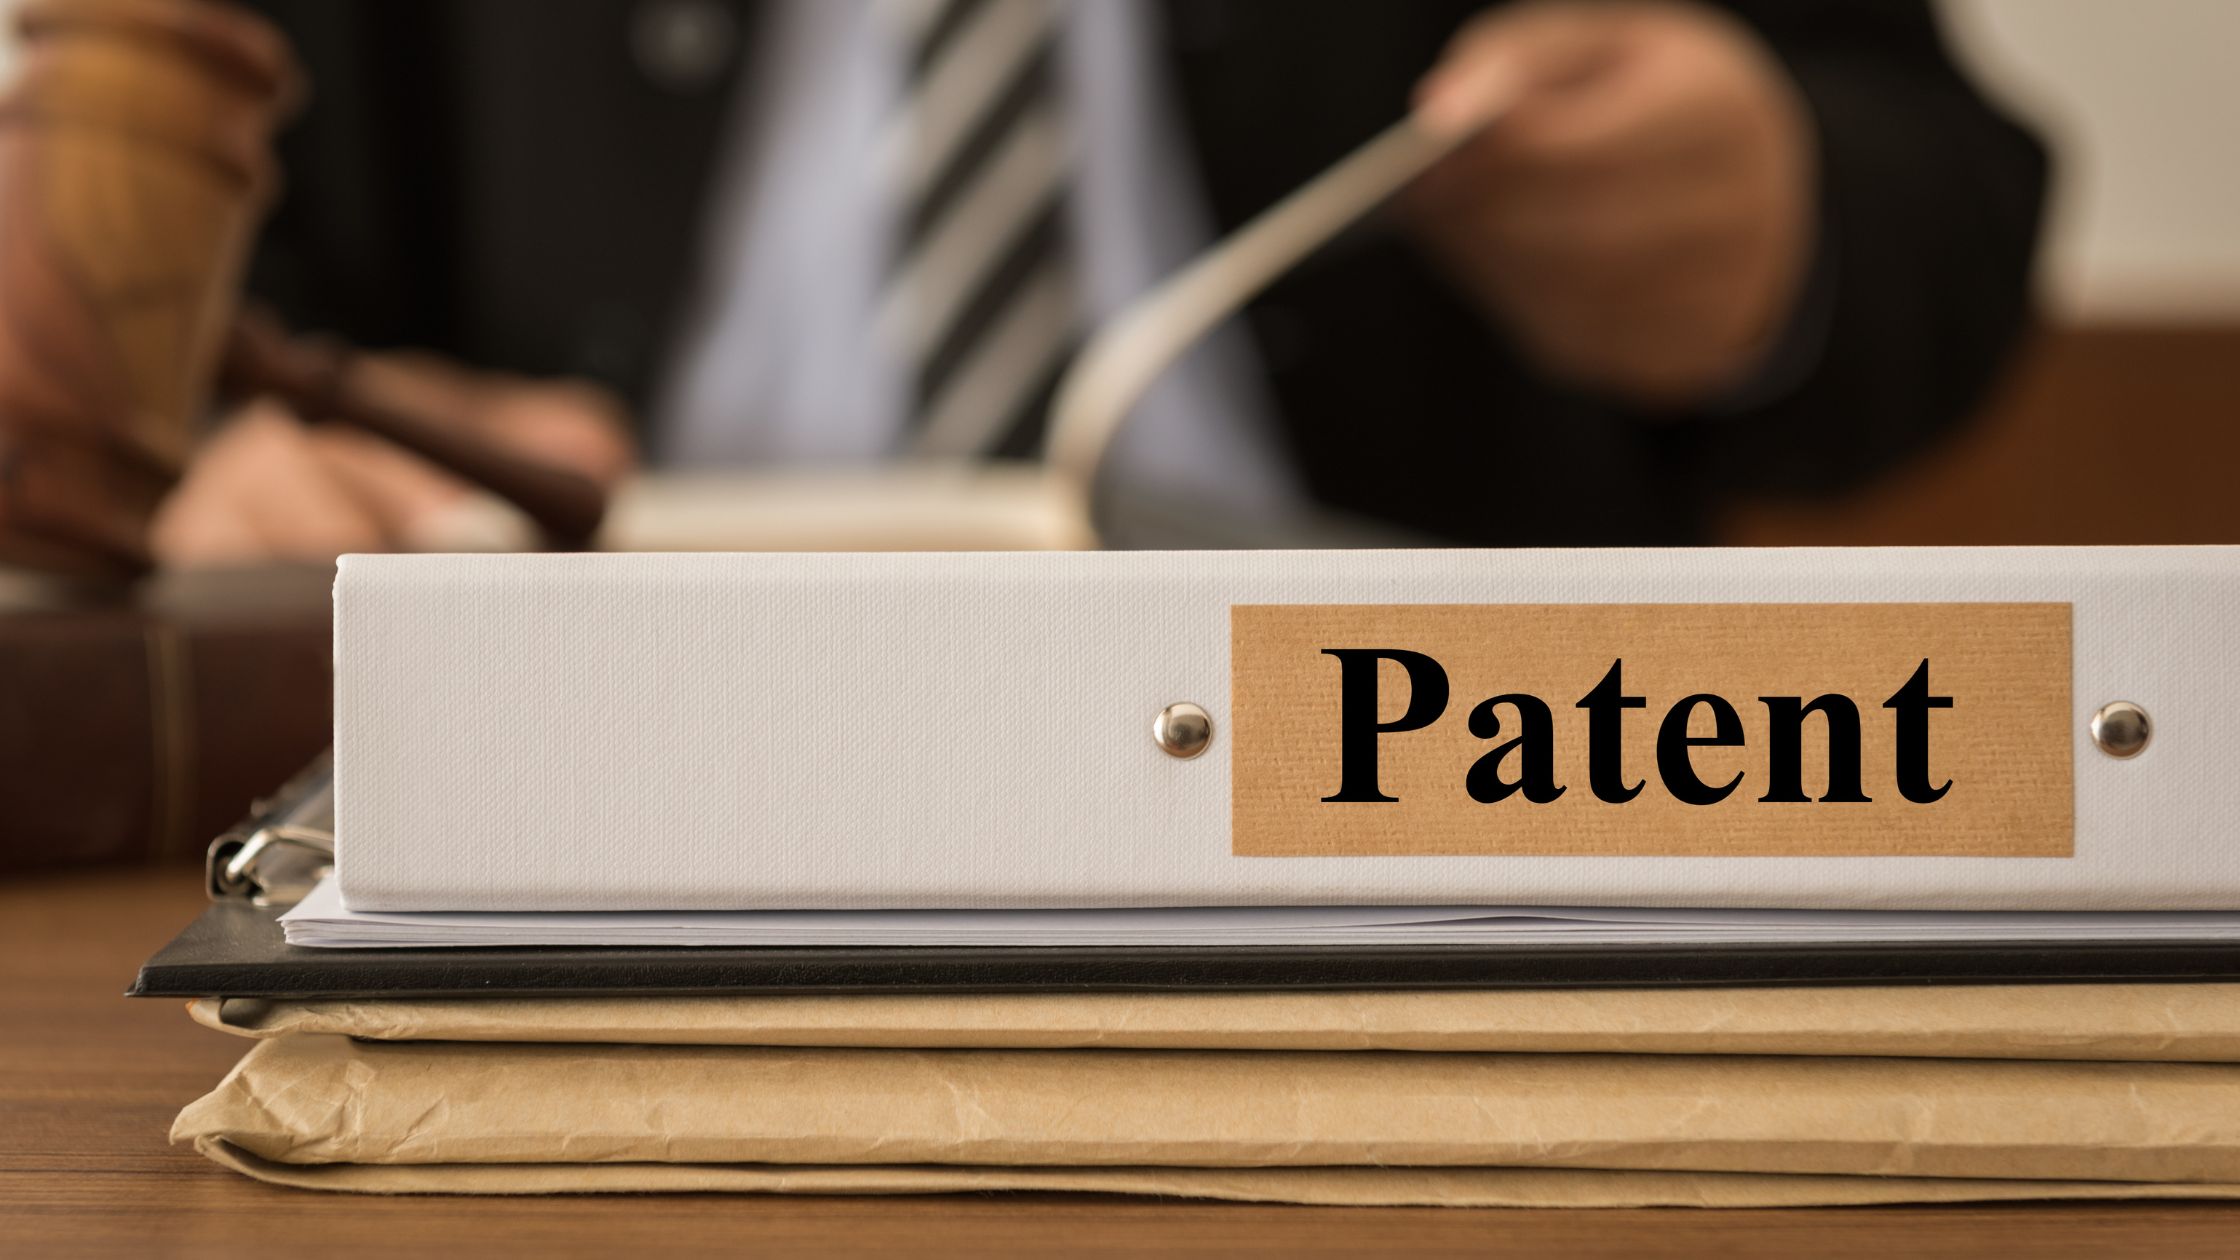 4 Essential Tips for Crafting Top-Notch Patent Drawings